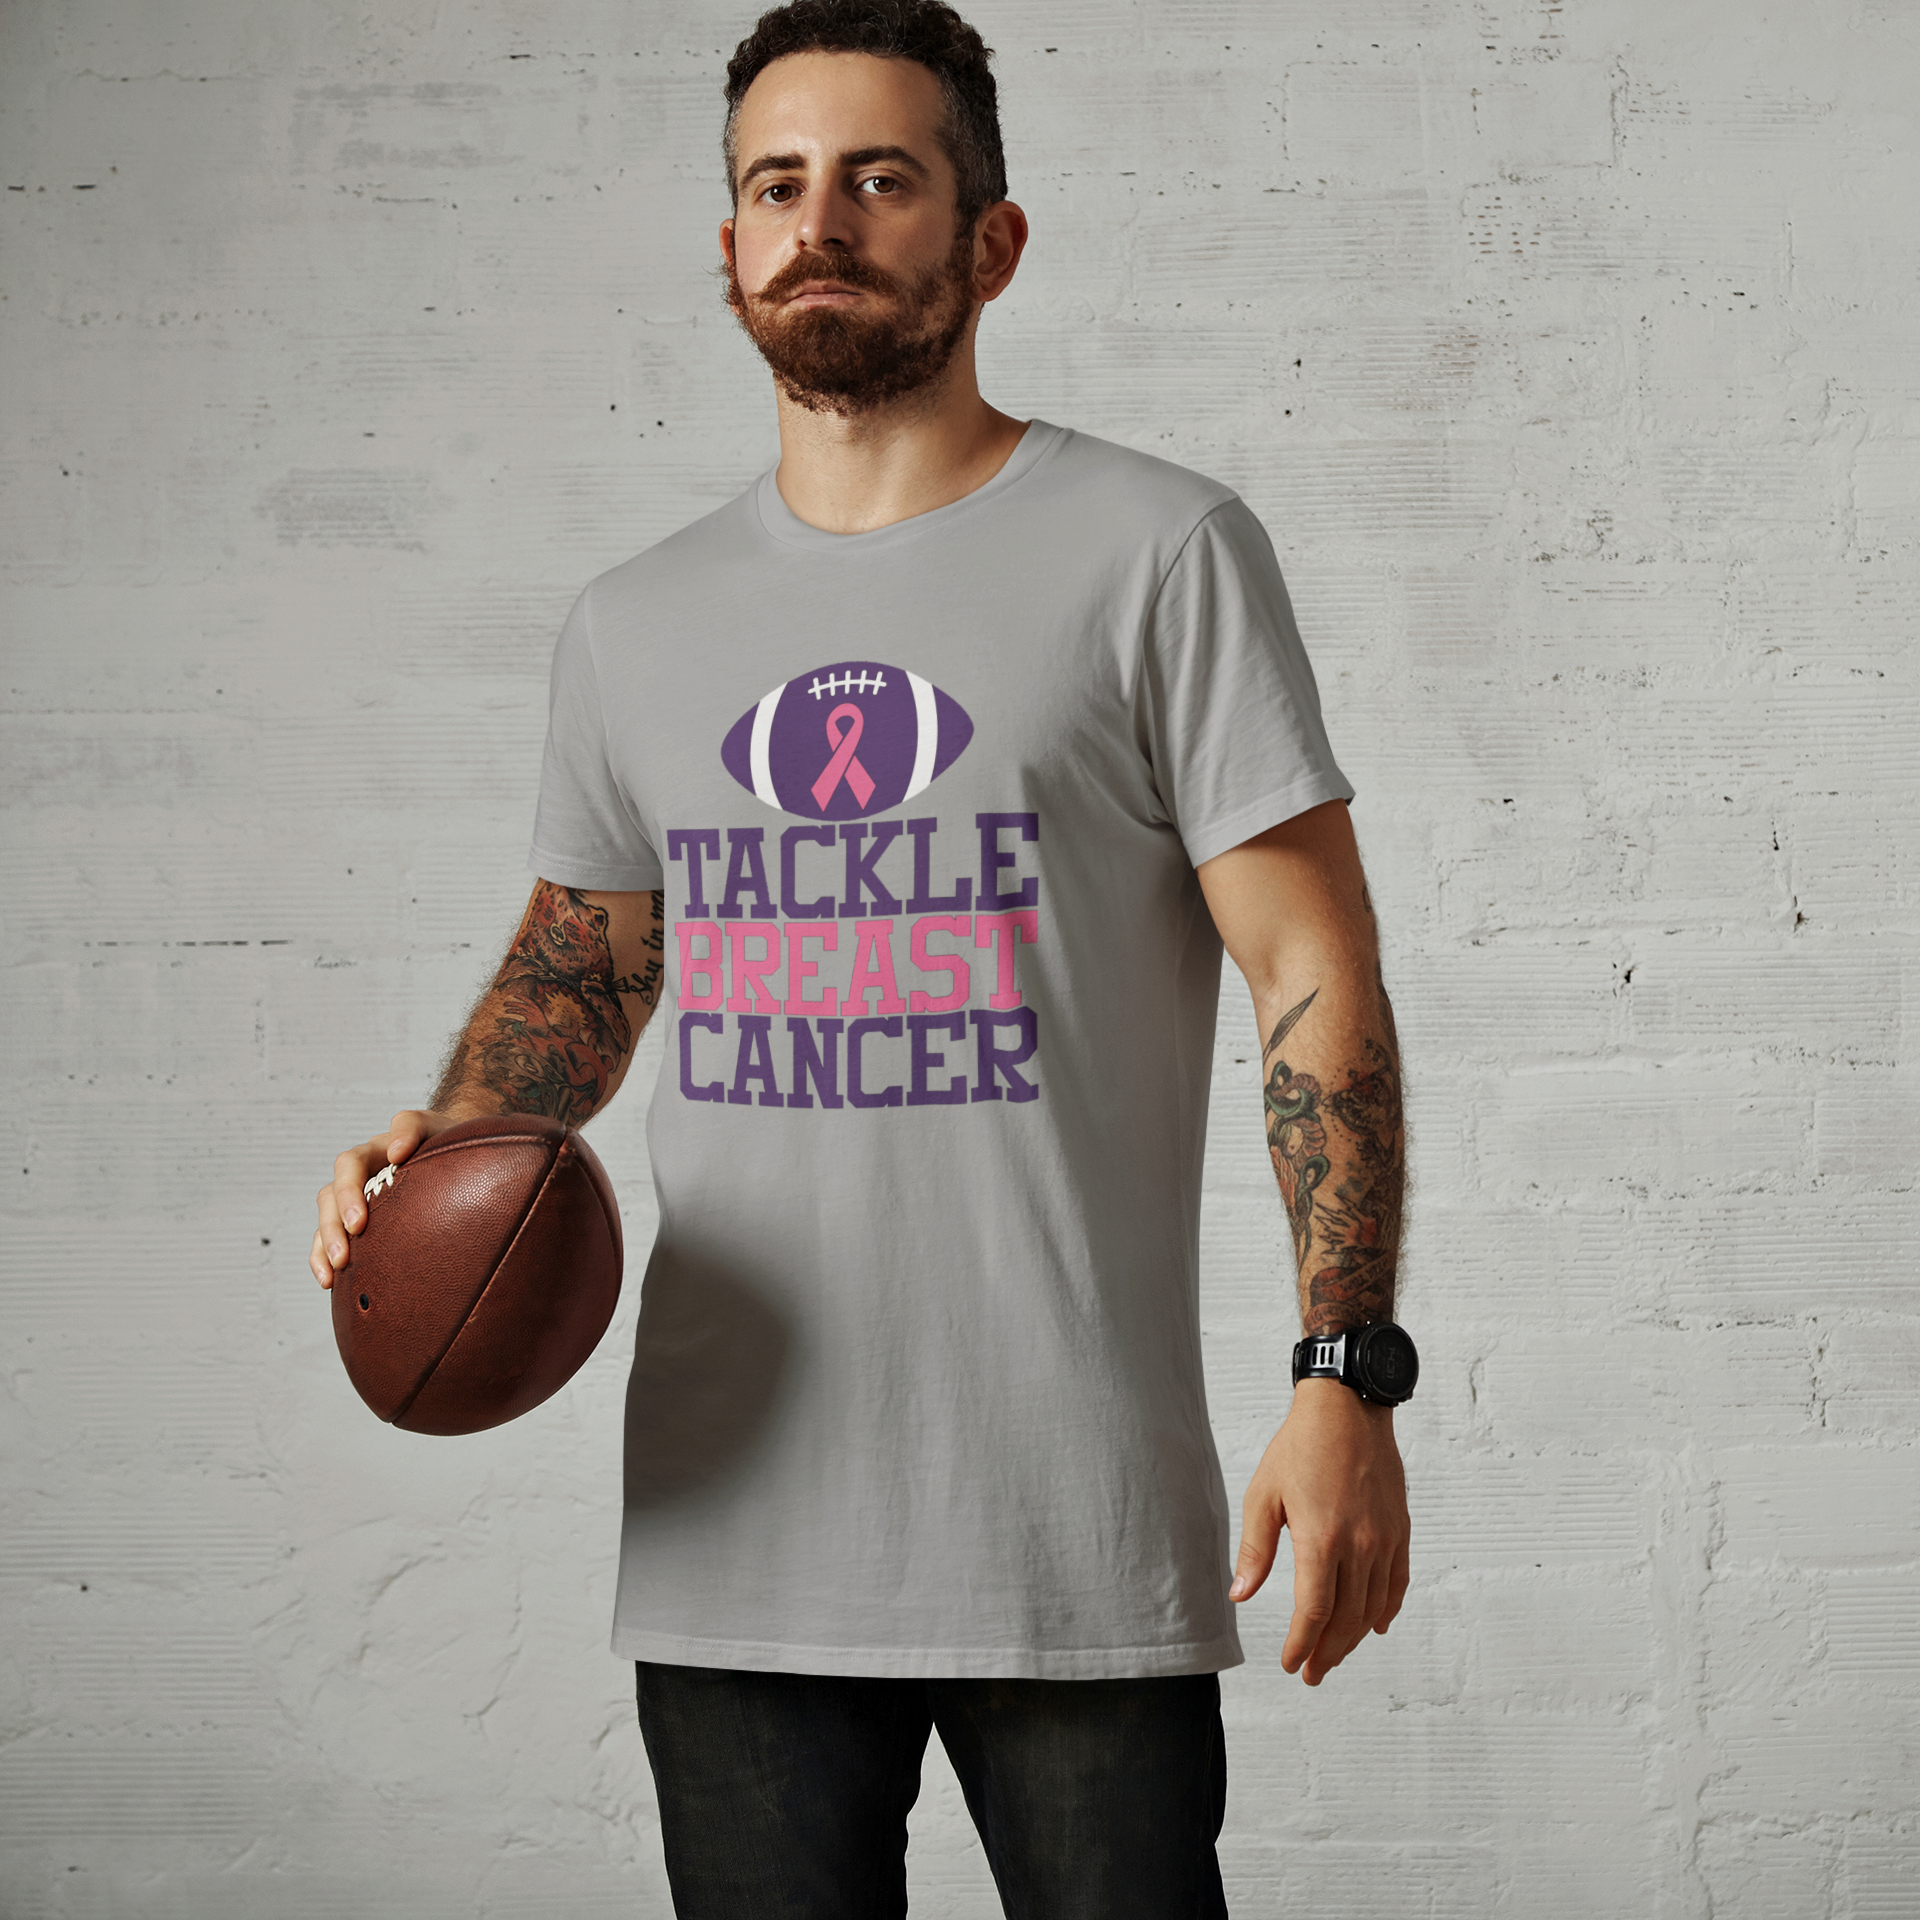 Tackle-Breast-Cancer-T-shirt